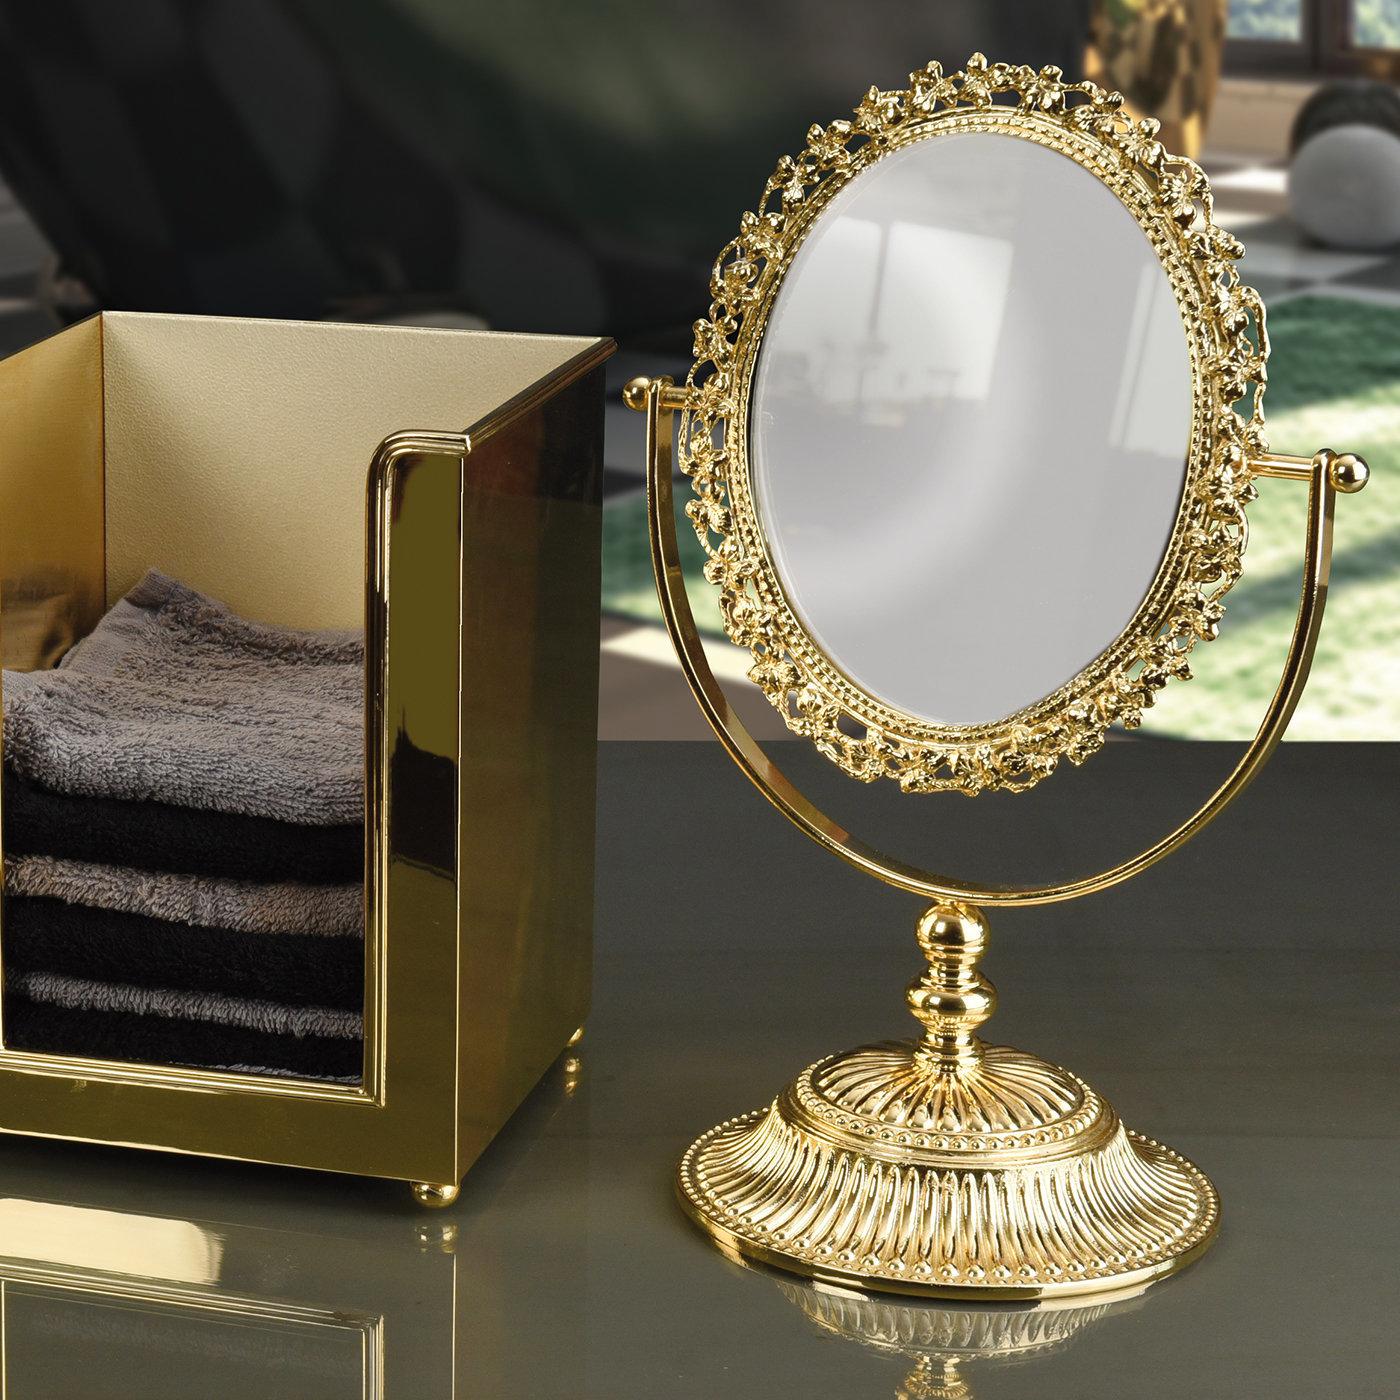 Brimming with lavish allure, this exceptional mirror will superbly complement a vanity table in a refined interior of either classic or modern inspiration. Timelessly elegant, its stupendously detailed design is handcrafted of brass finished with